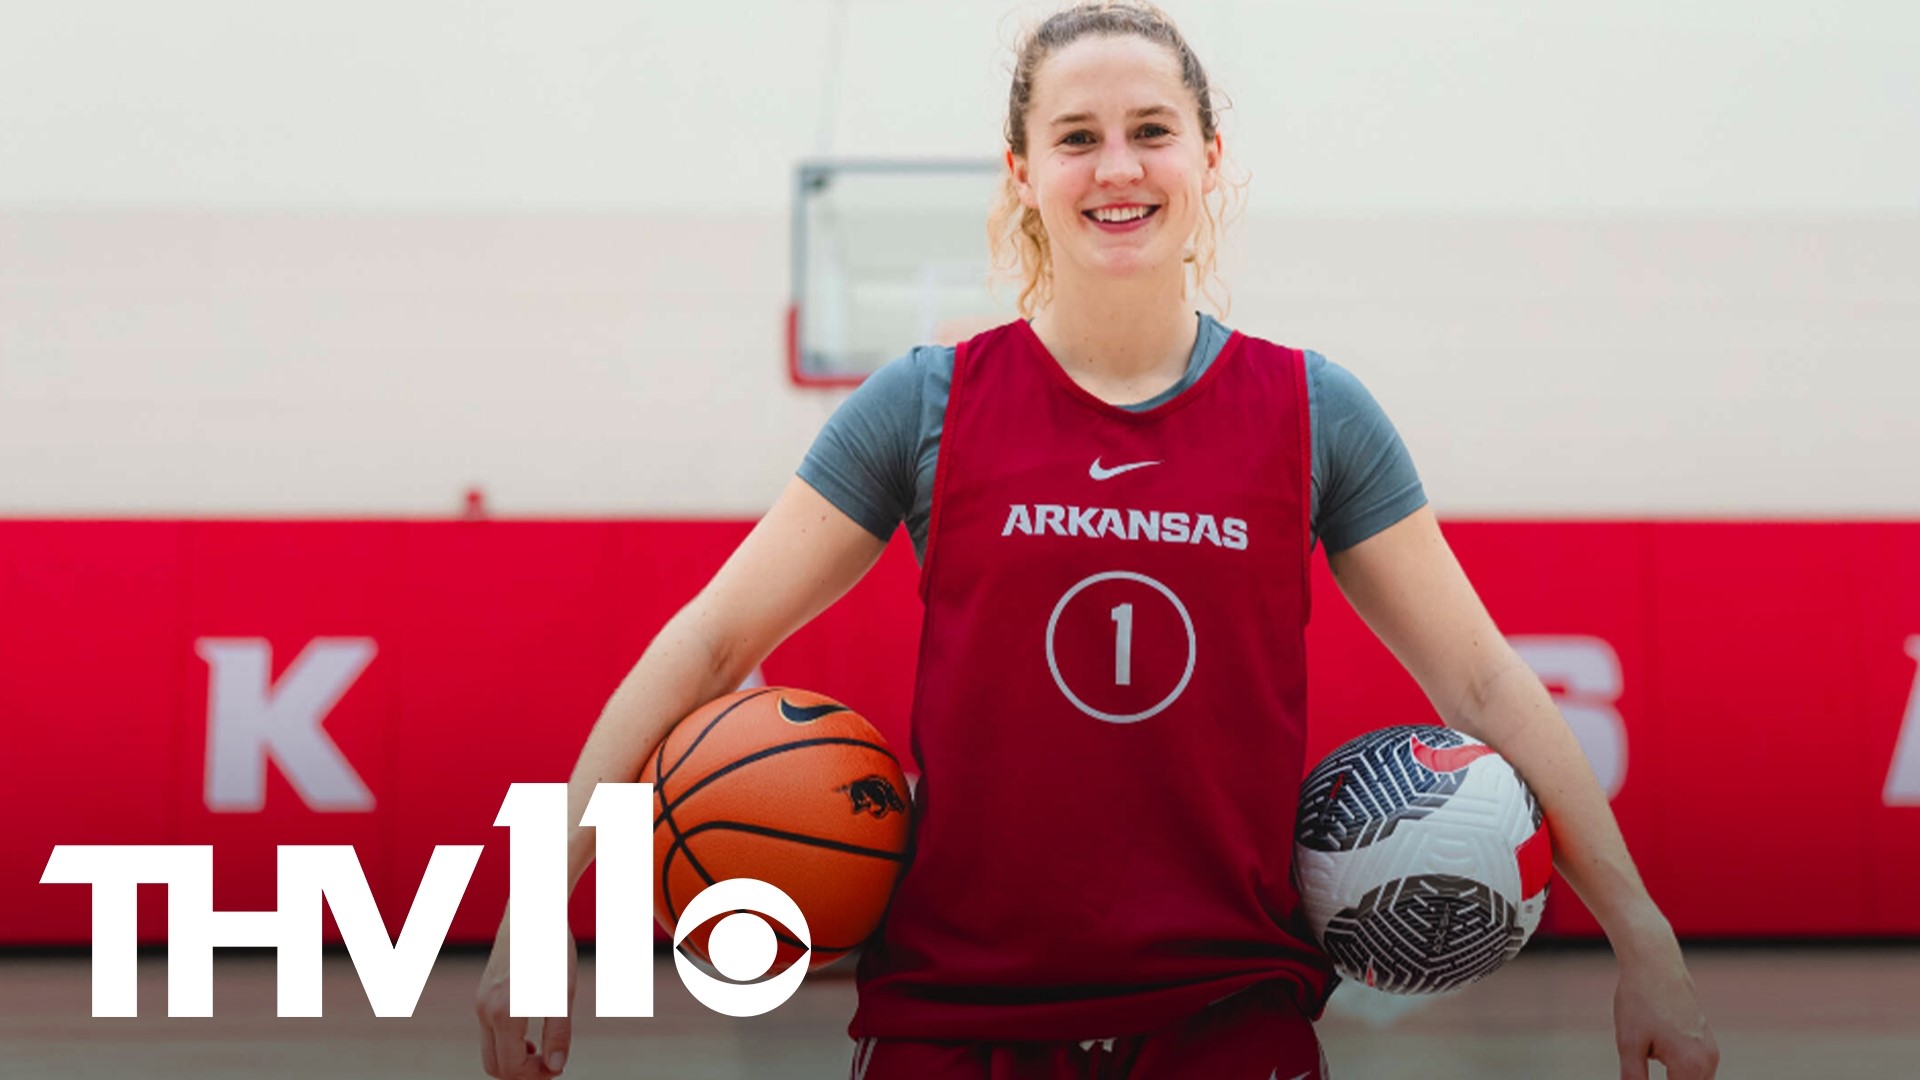 We heard from Arkansas Razorback Bea Franklin, who is making the switch from soccer to basketball for the school.